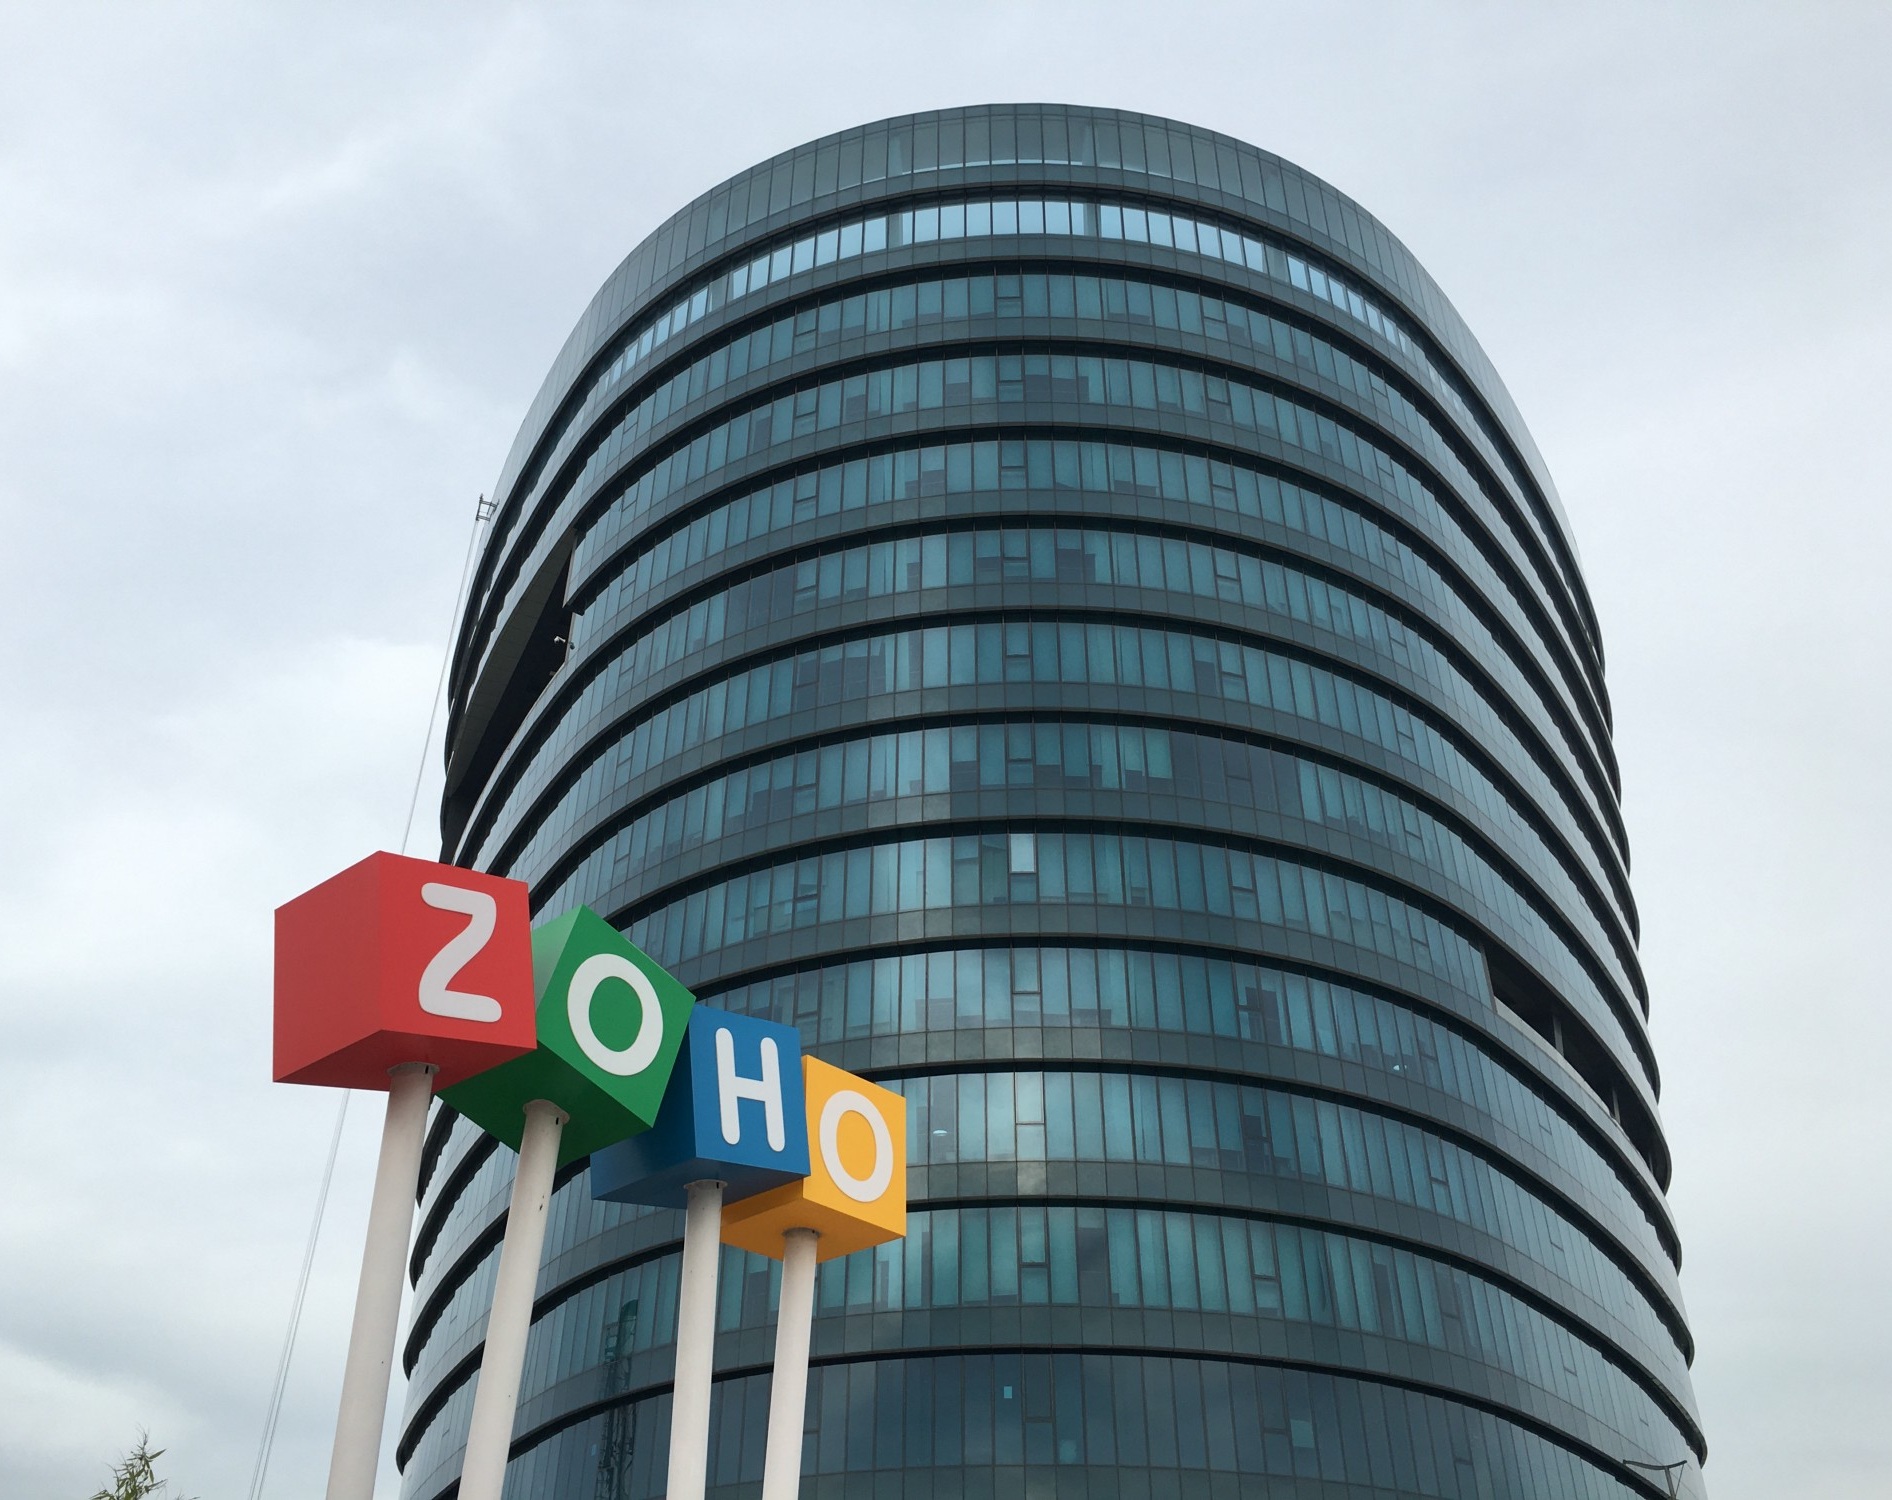 Where Can I See a Full List of Zoho Products and Services?